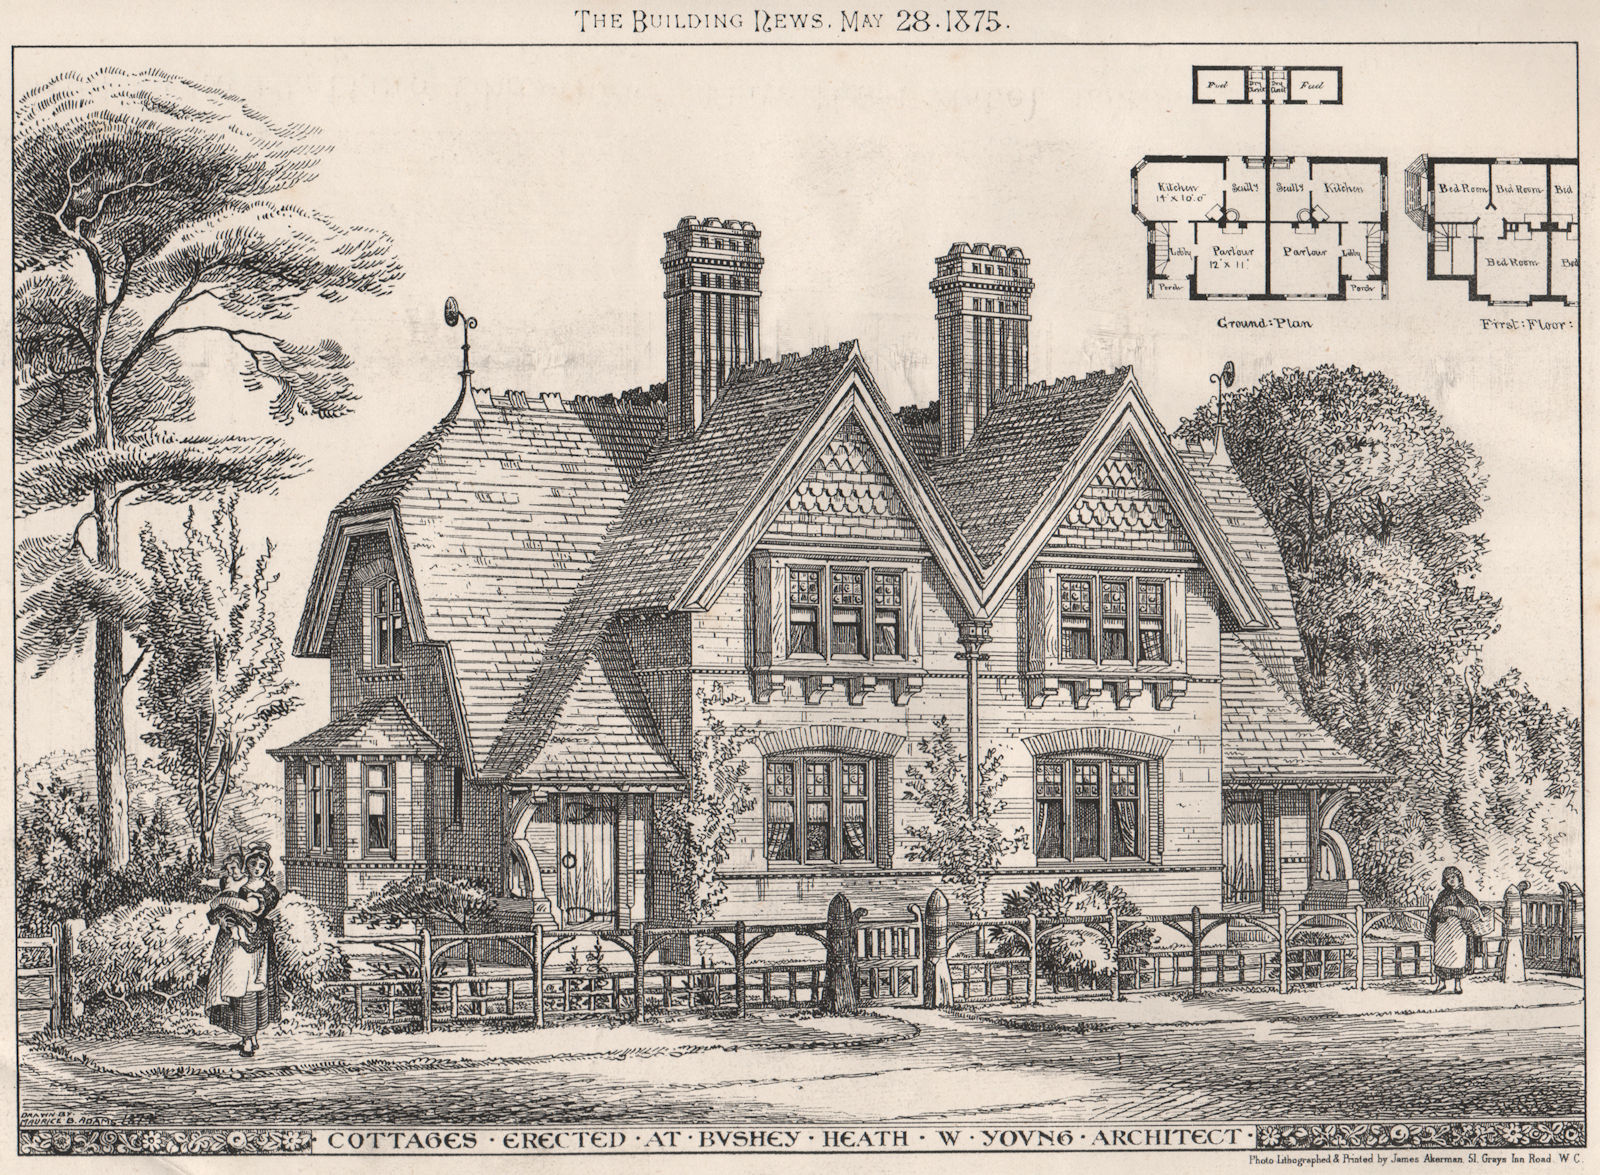 Associate Product Cottages erected at Bushey Heath; W. Young, Architect. Hertfordshire 1875